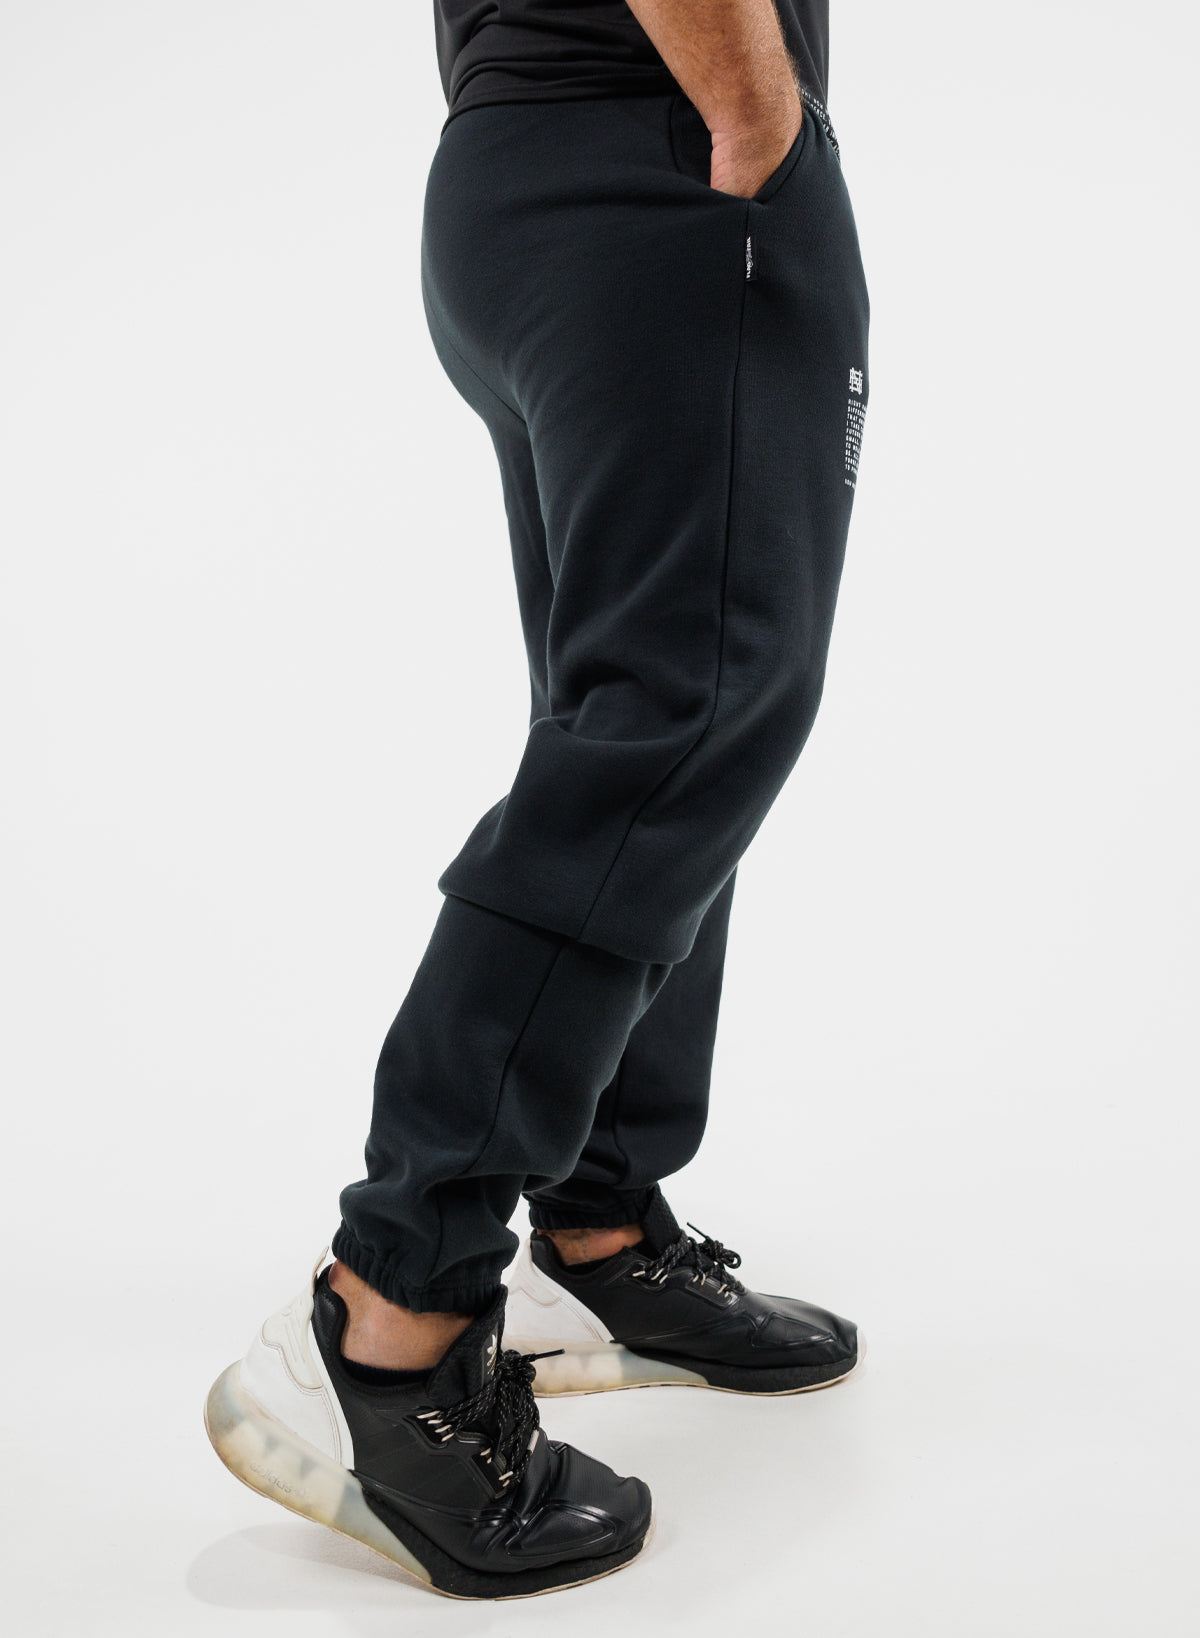 MORE THAN EVER FITTED JOGGERS - BLACK